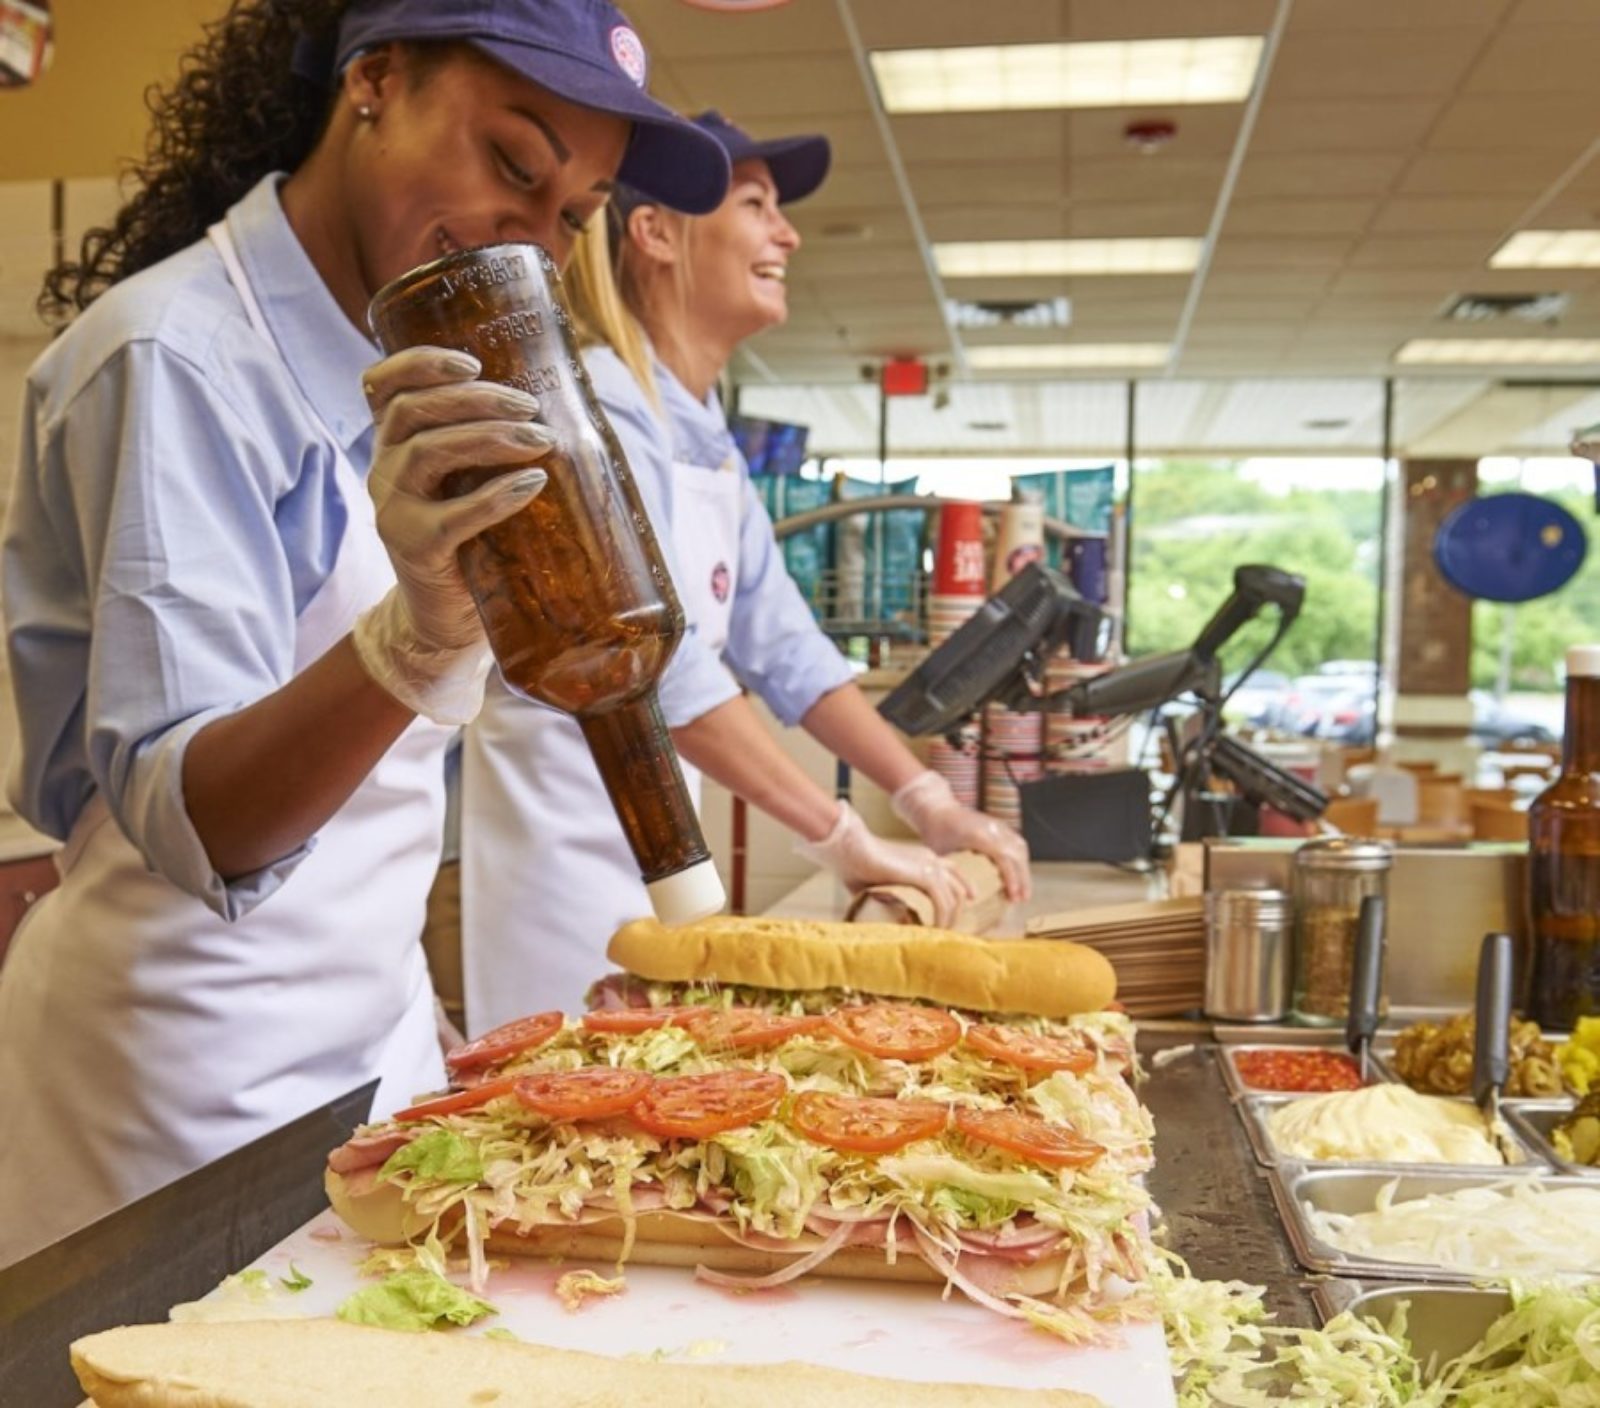 Jersey Mike's Subs Crunchtime Case Study